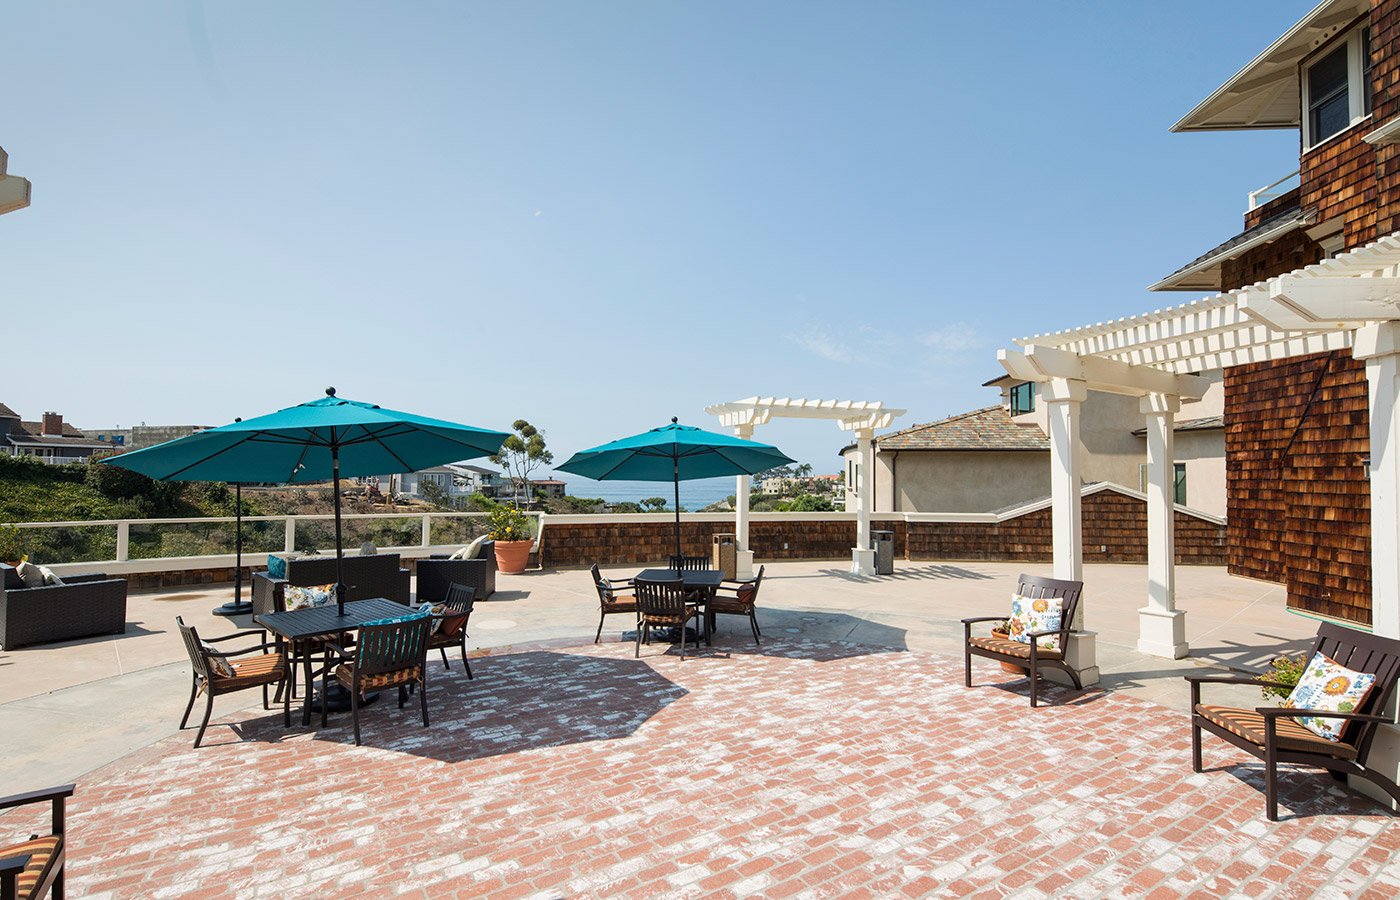 large sunny patio area with table, chairs and umbrellas